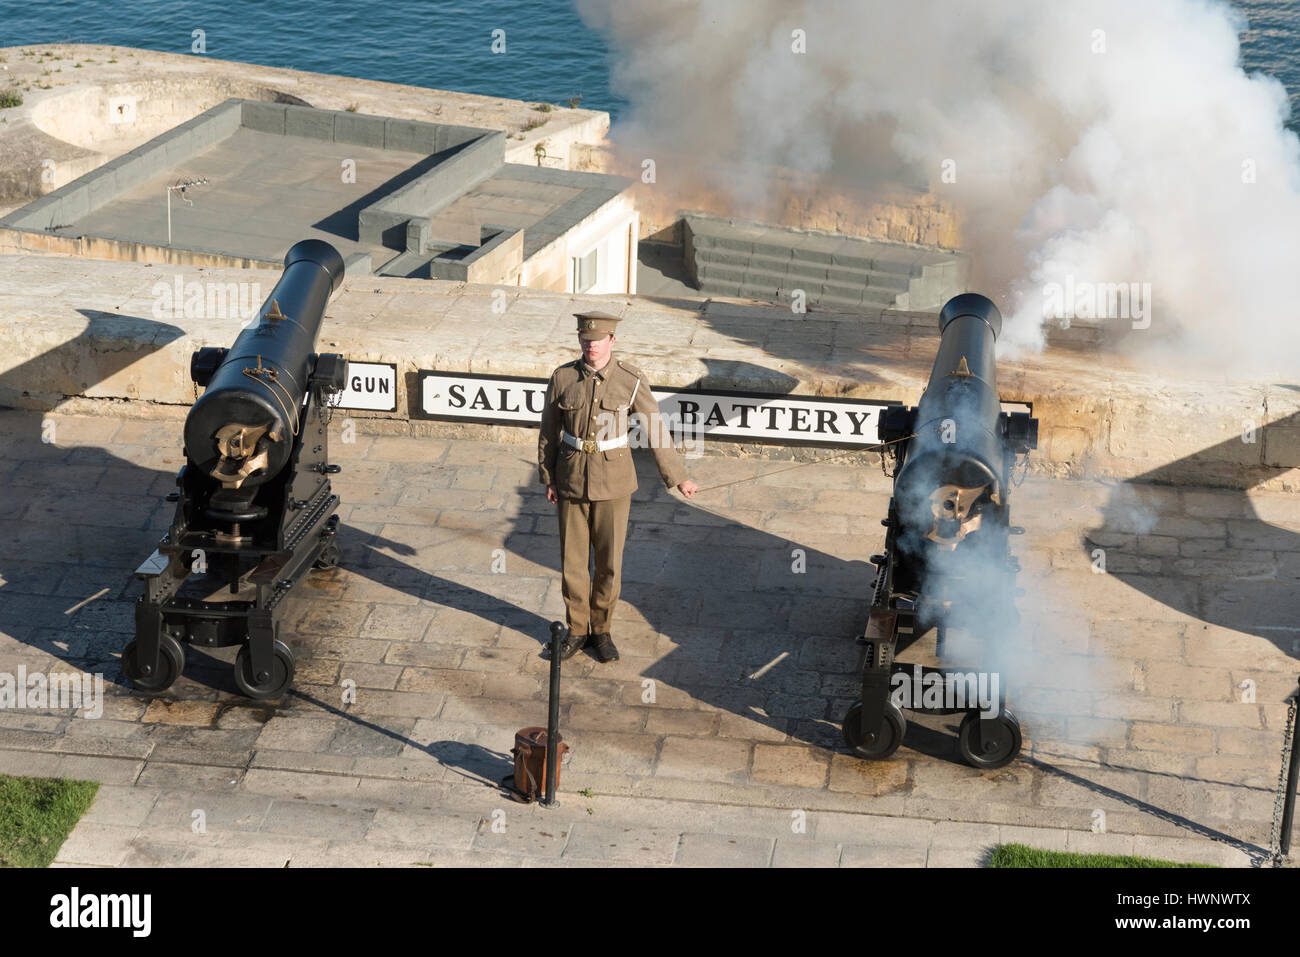 A soldier in uniform firing a canon at the saluting battery at Valetta Malta overlookingthe Grand Harbour for the daily salute Stock Photo